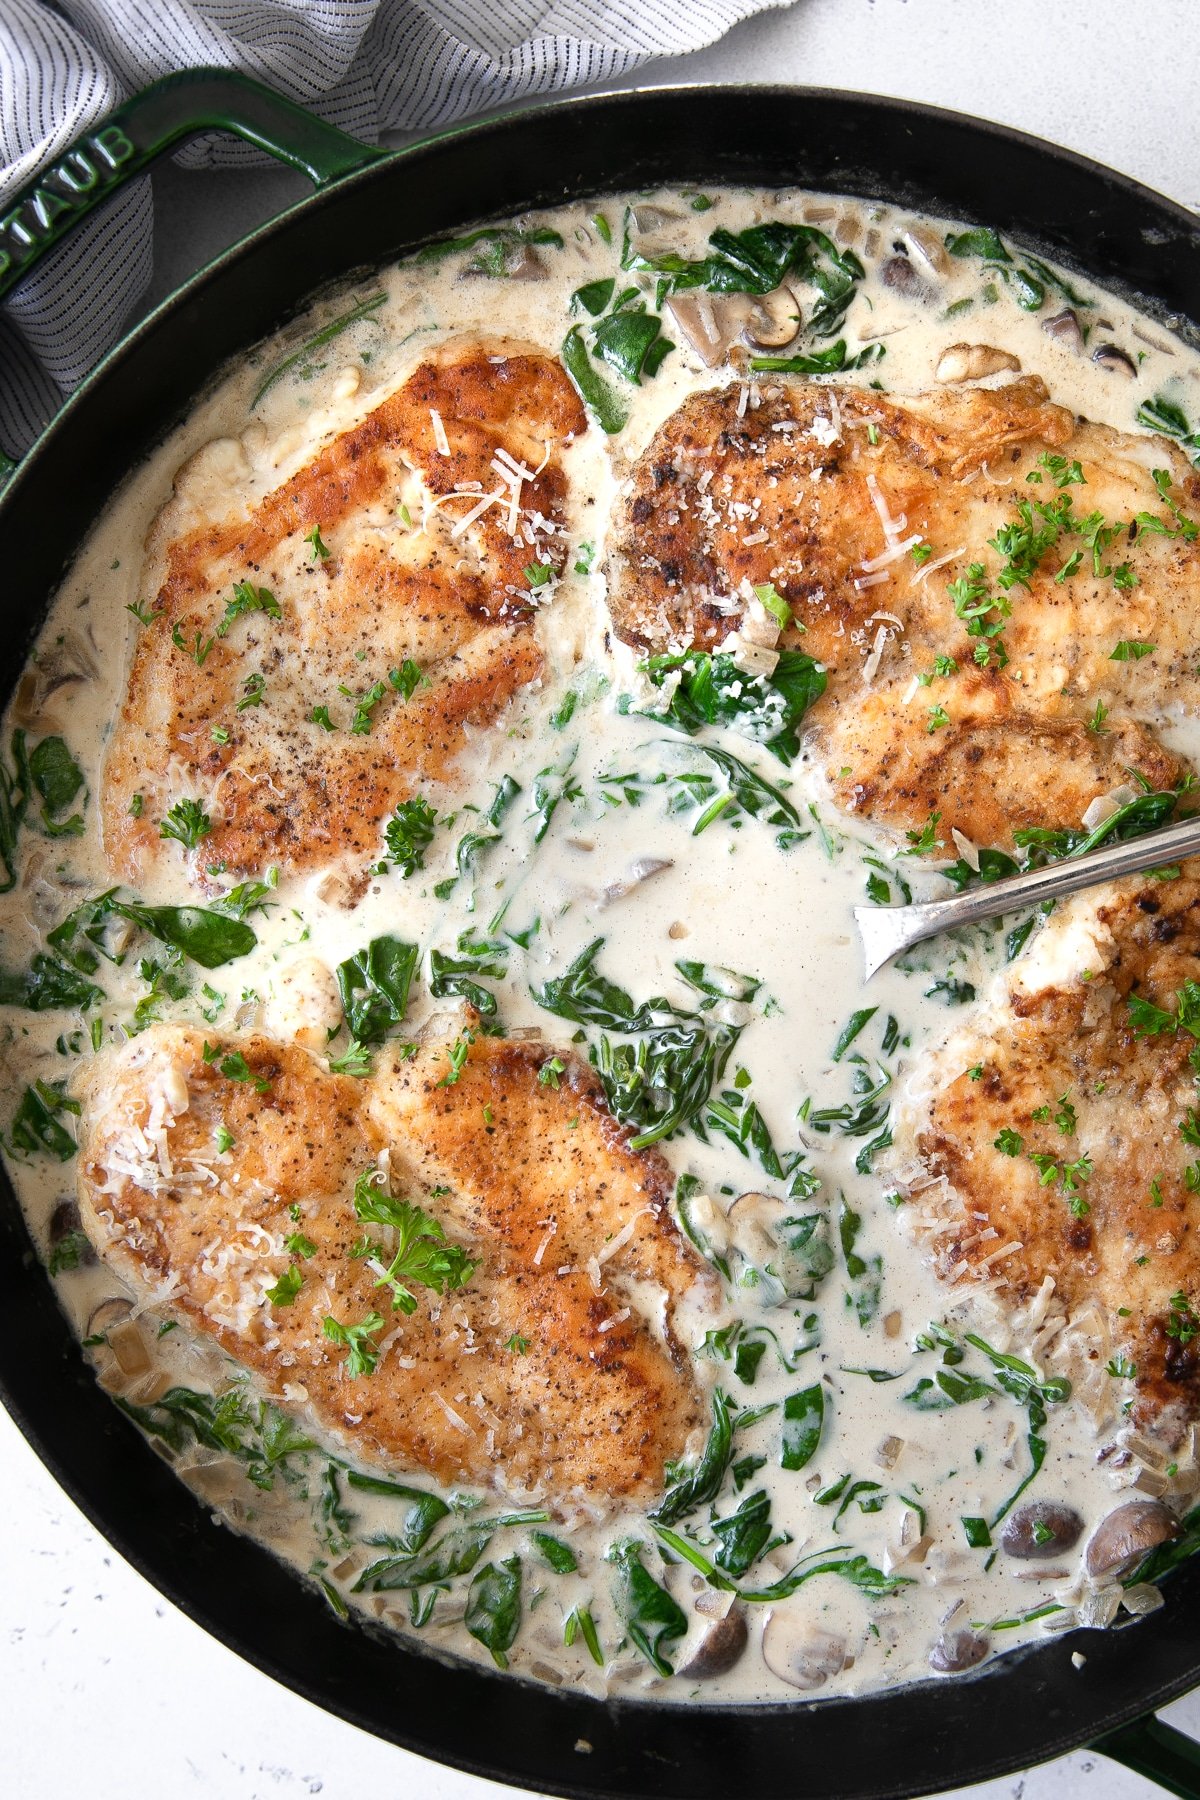 Large skillet filled with cooked chicken breasts in a creamy mushroom and spinach florentine sauce.